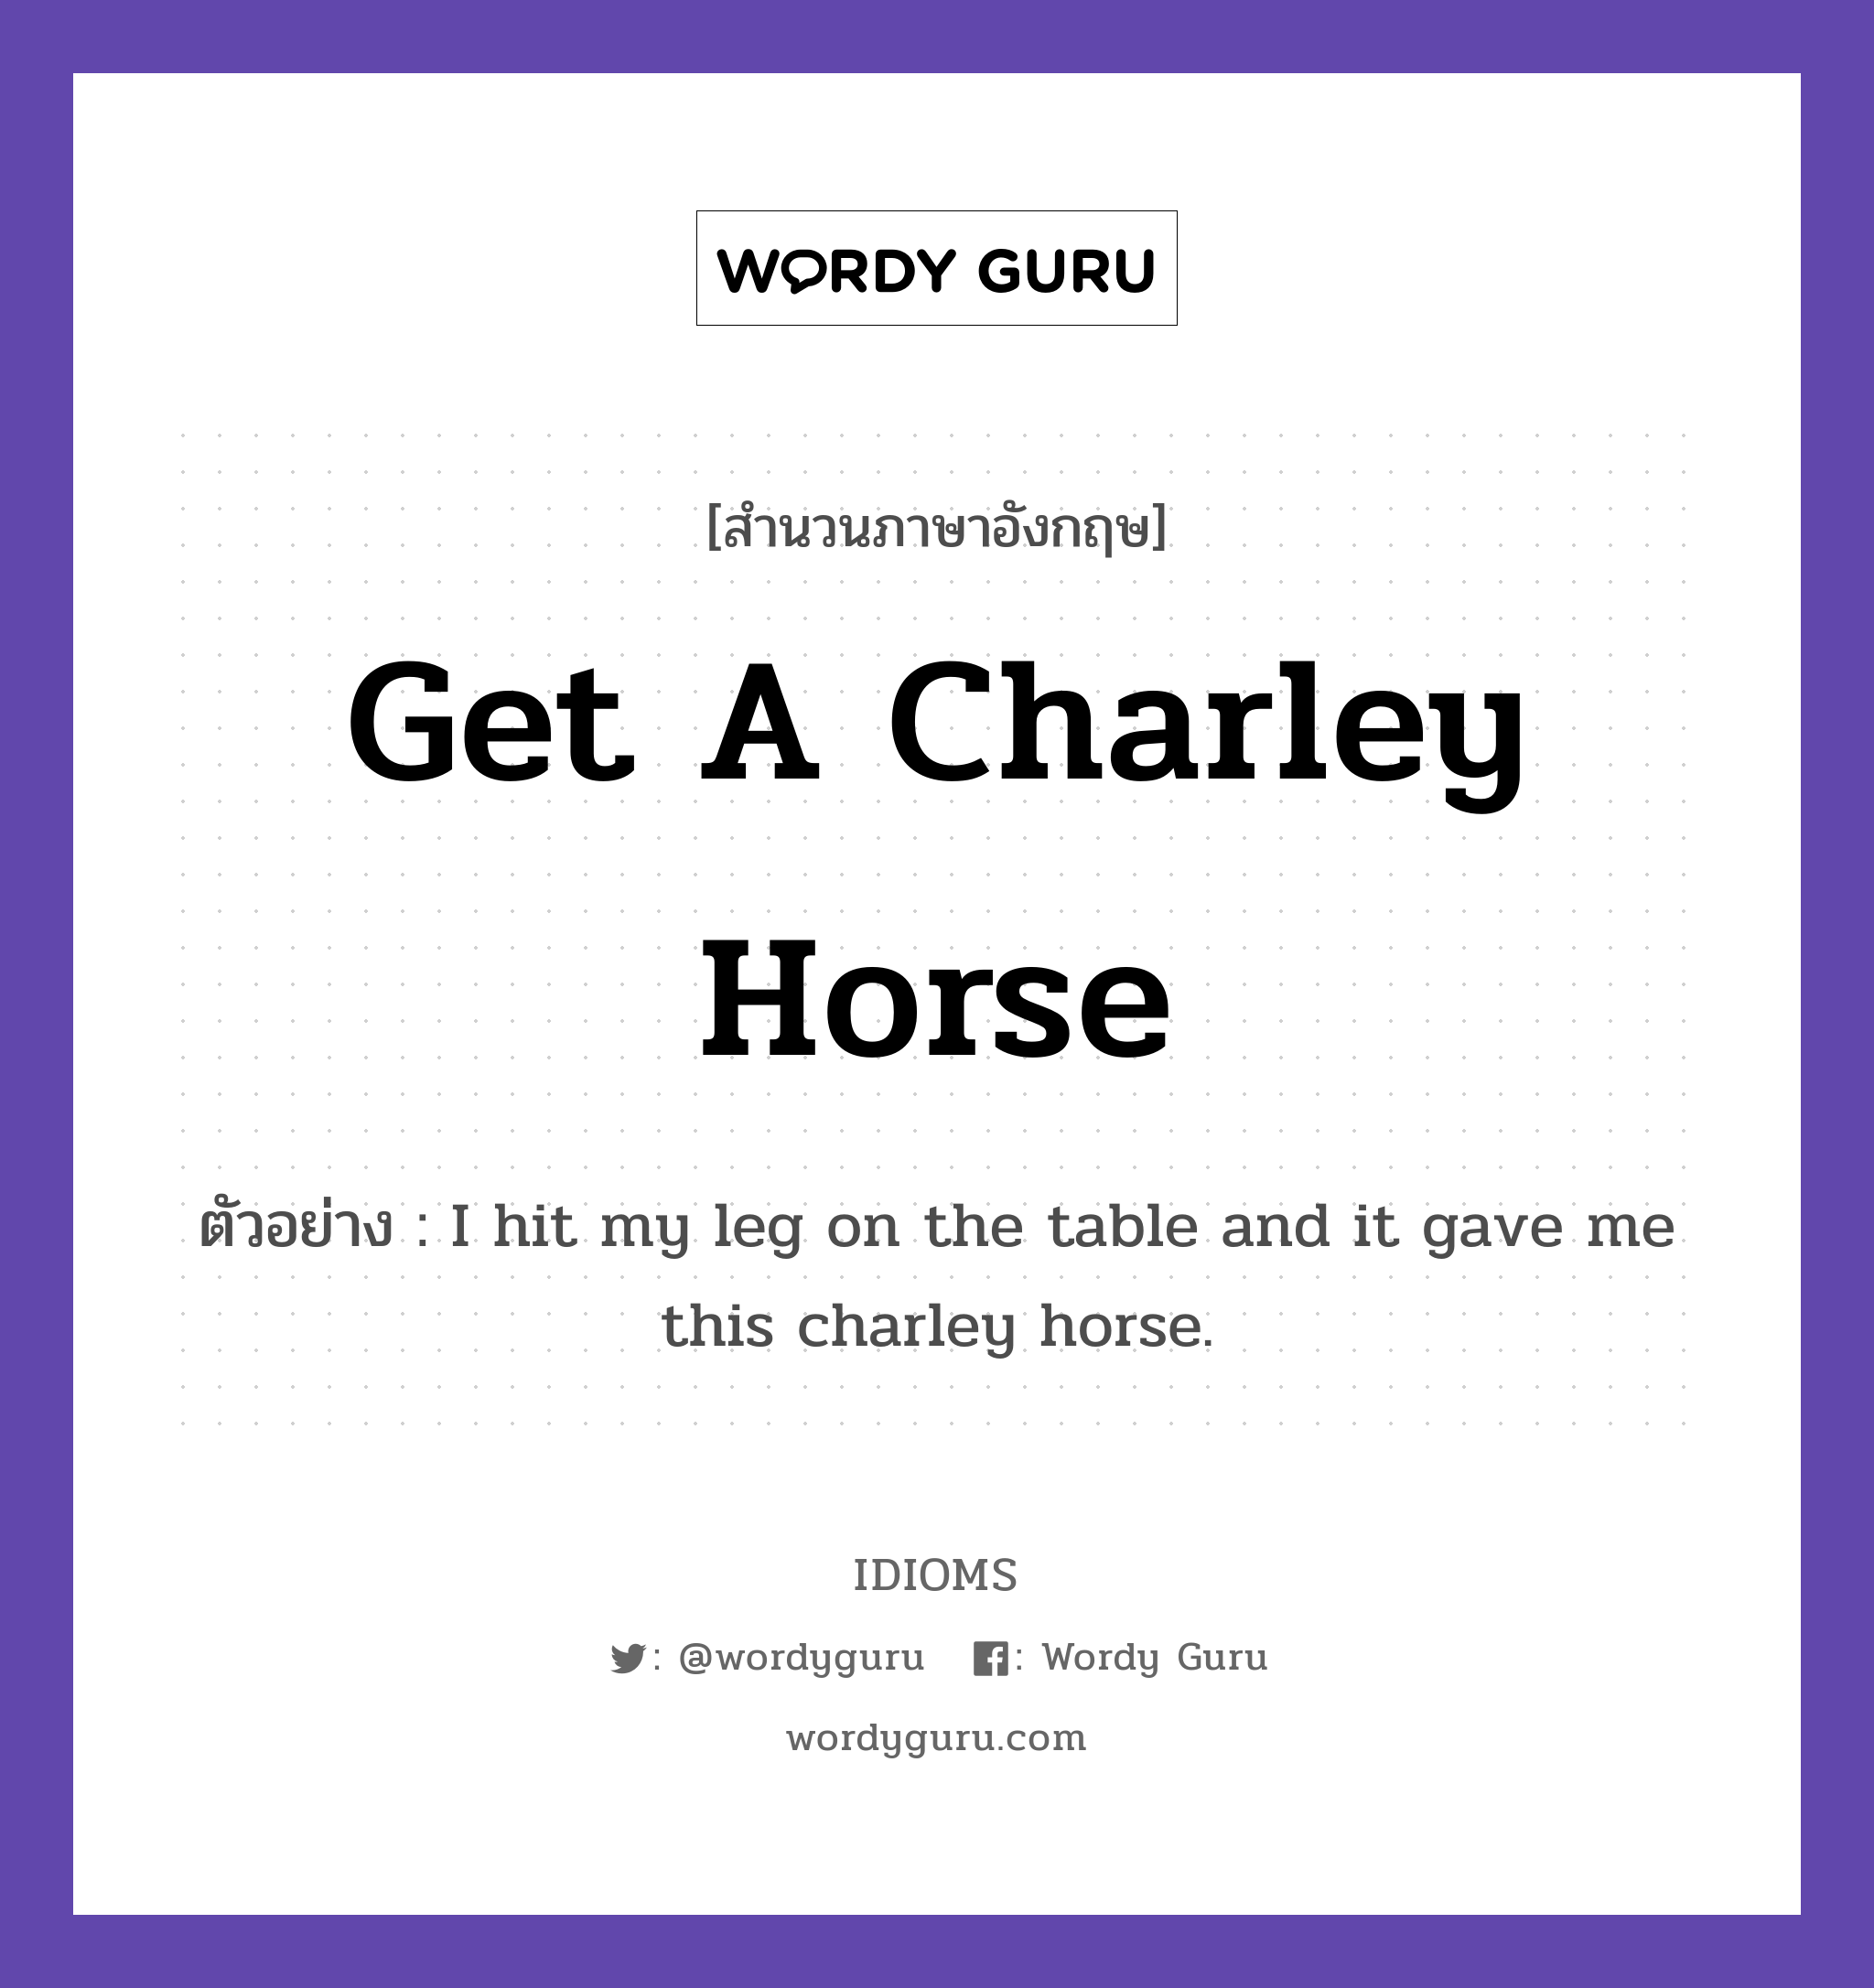 Get A Charley Horse แปลว่า?, สำนวนภาษาอังกฤษ Get A Charley Horse ตัวอย่าง I hit my leg on the table and it gave me this charley horse.